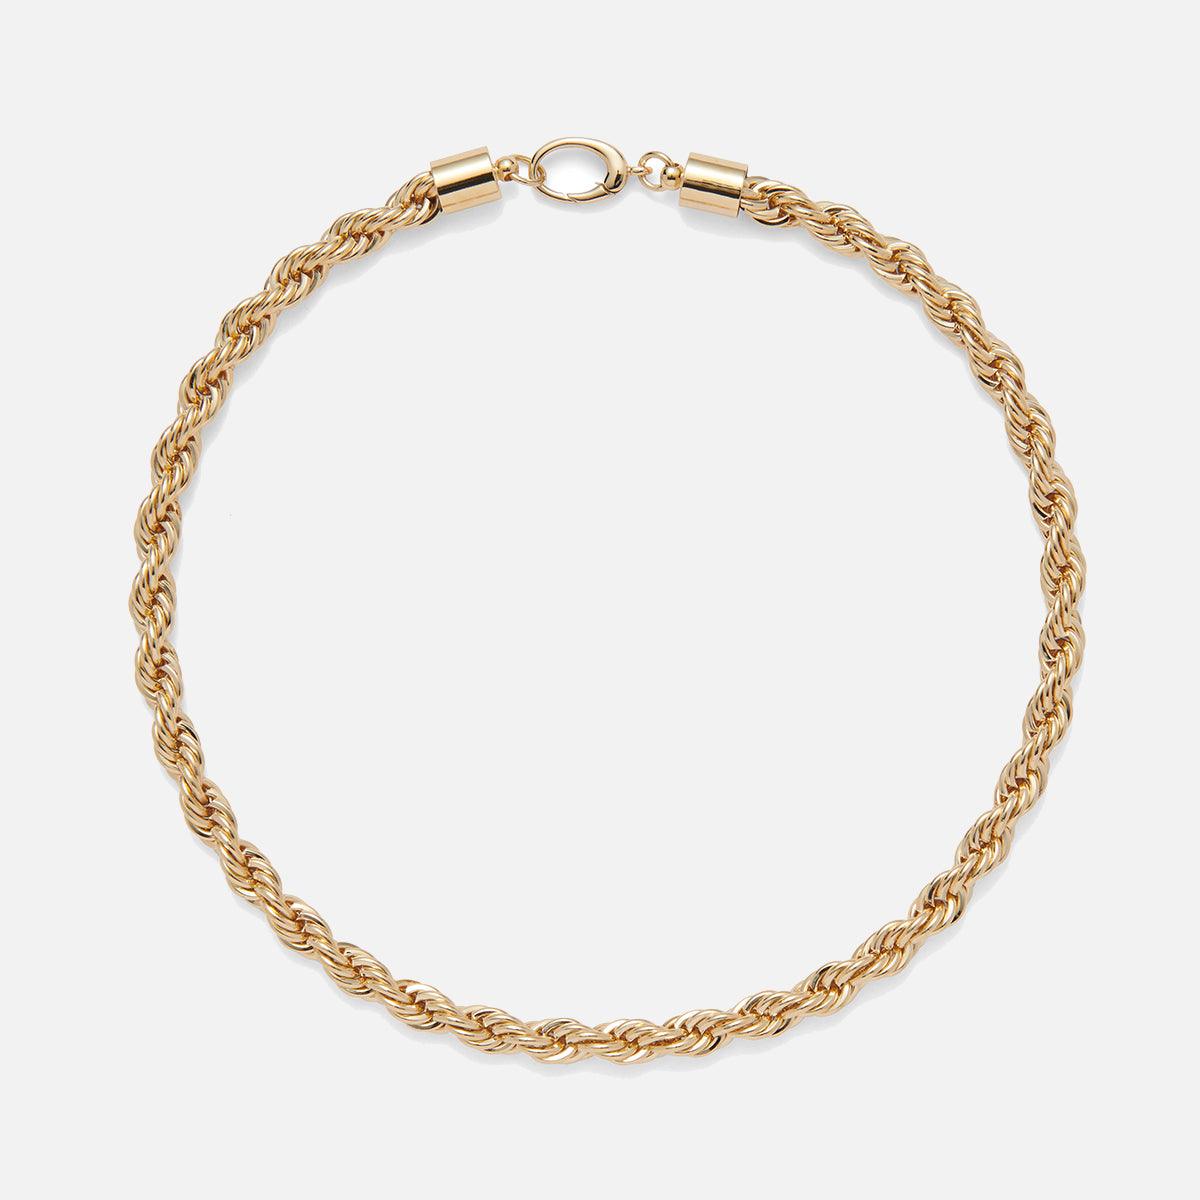 XL Rope Chain Necklace in Gold - At Present